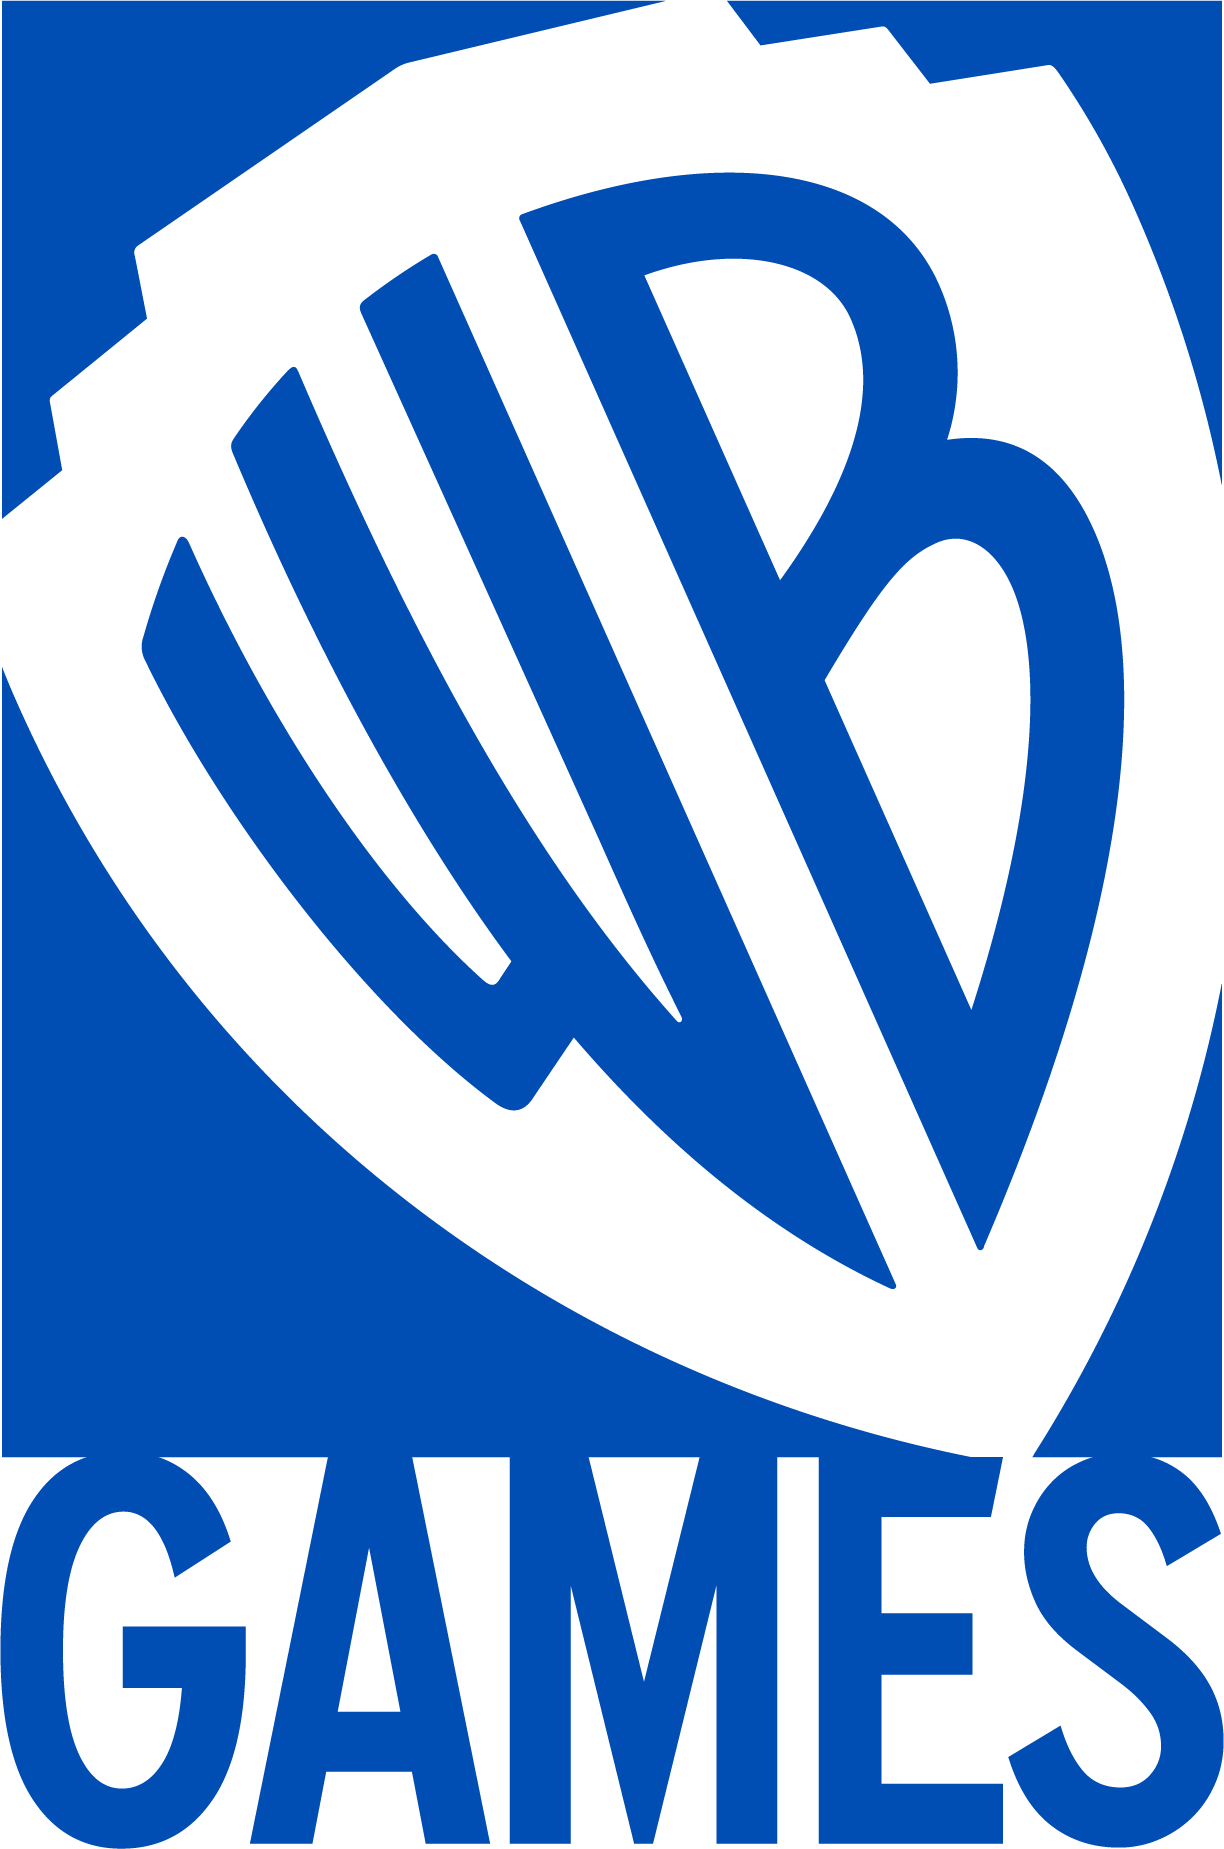 What If: WB Games 2019 logo [2005 logo style] by Tema2002 on DeviantArt